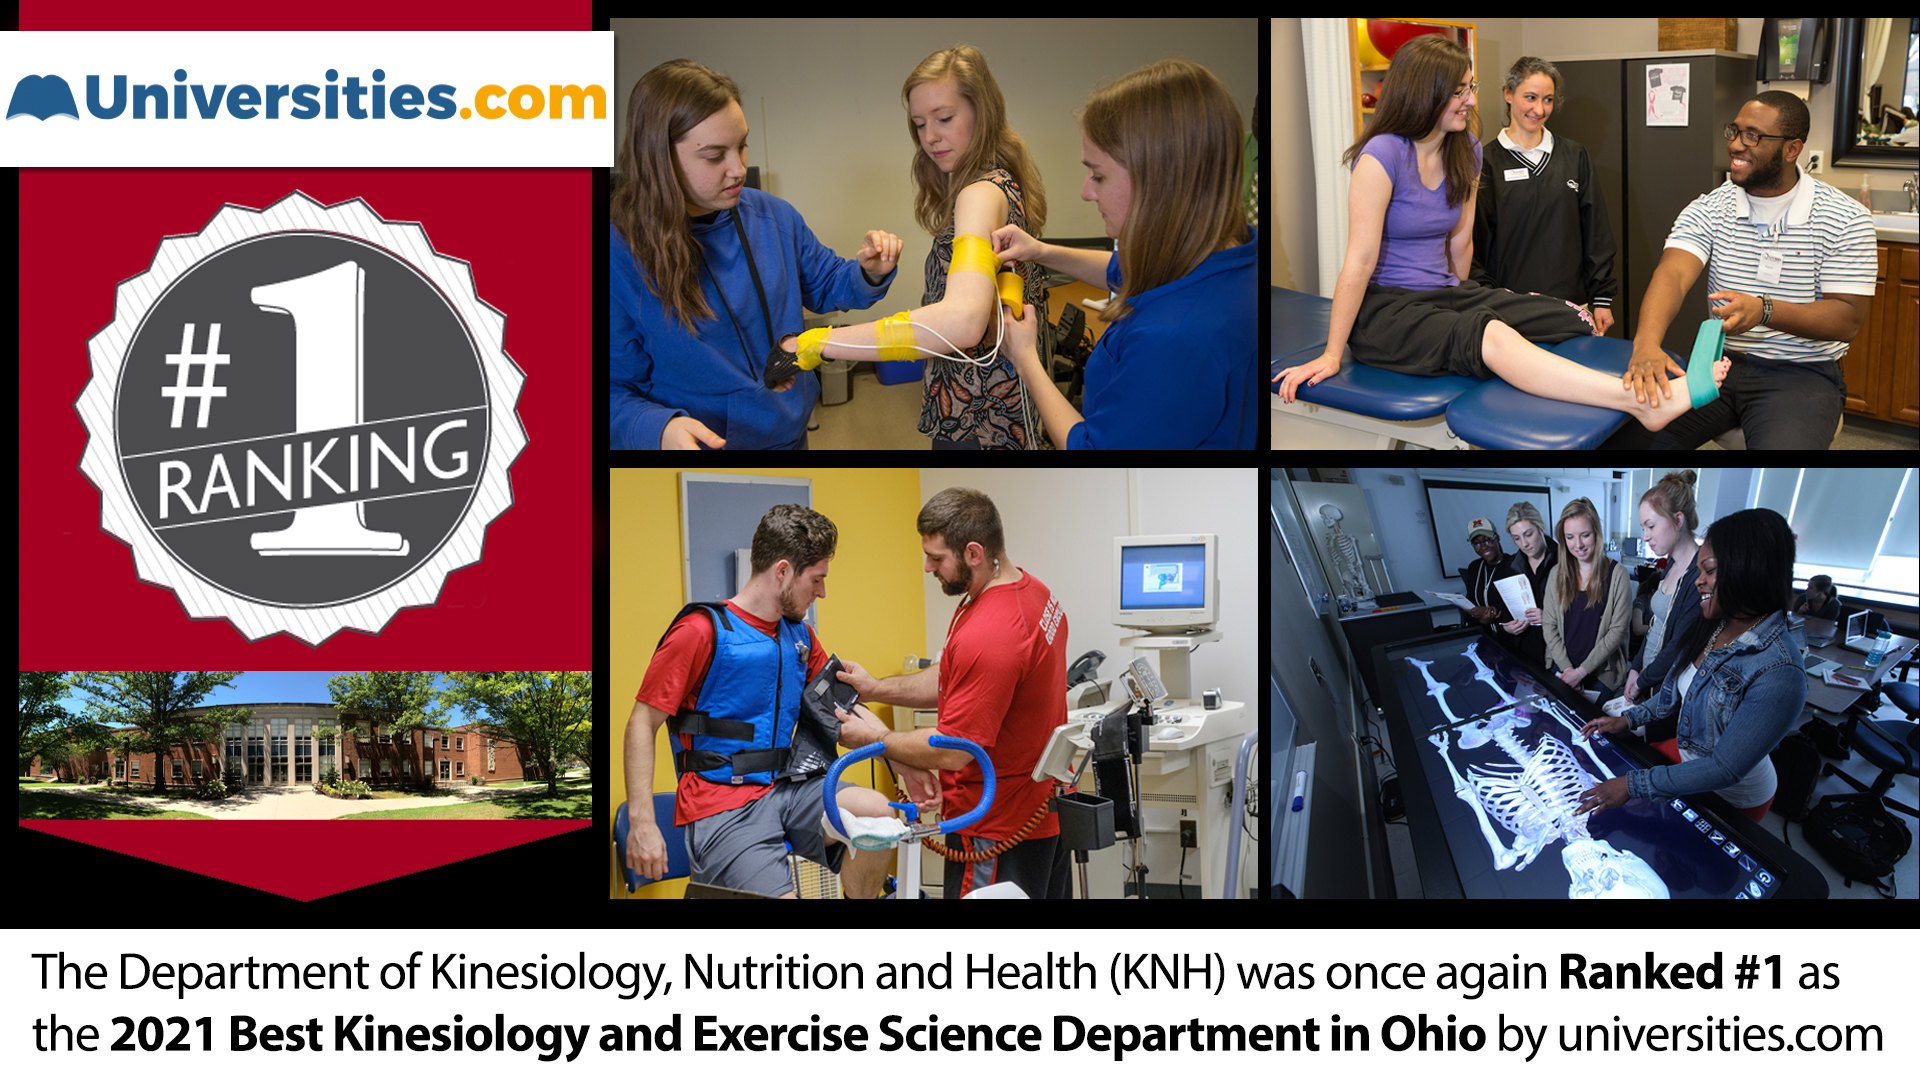 The Department of Kinesiology, Nutrition and Health ranked #1 as the best Kinesiology and Exercise Science Department in Ohio by universities.com